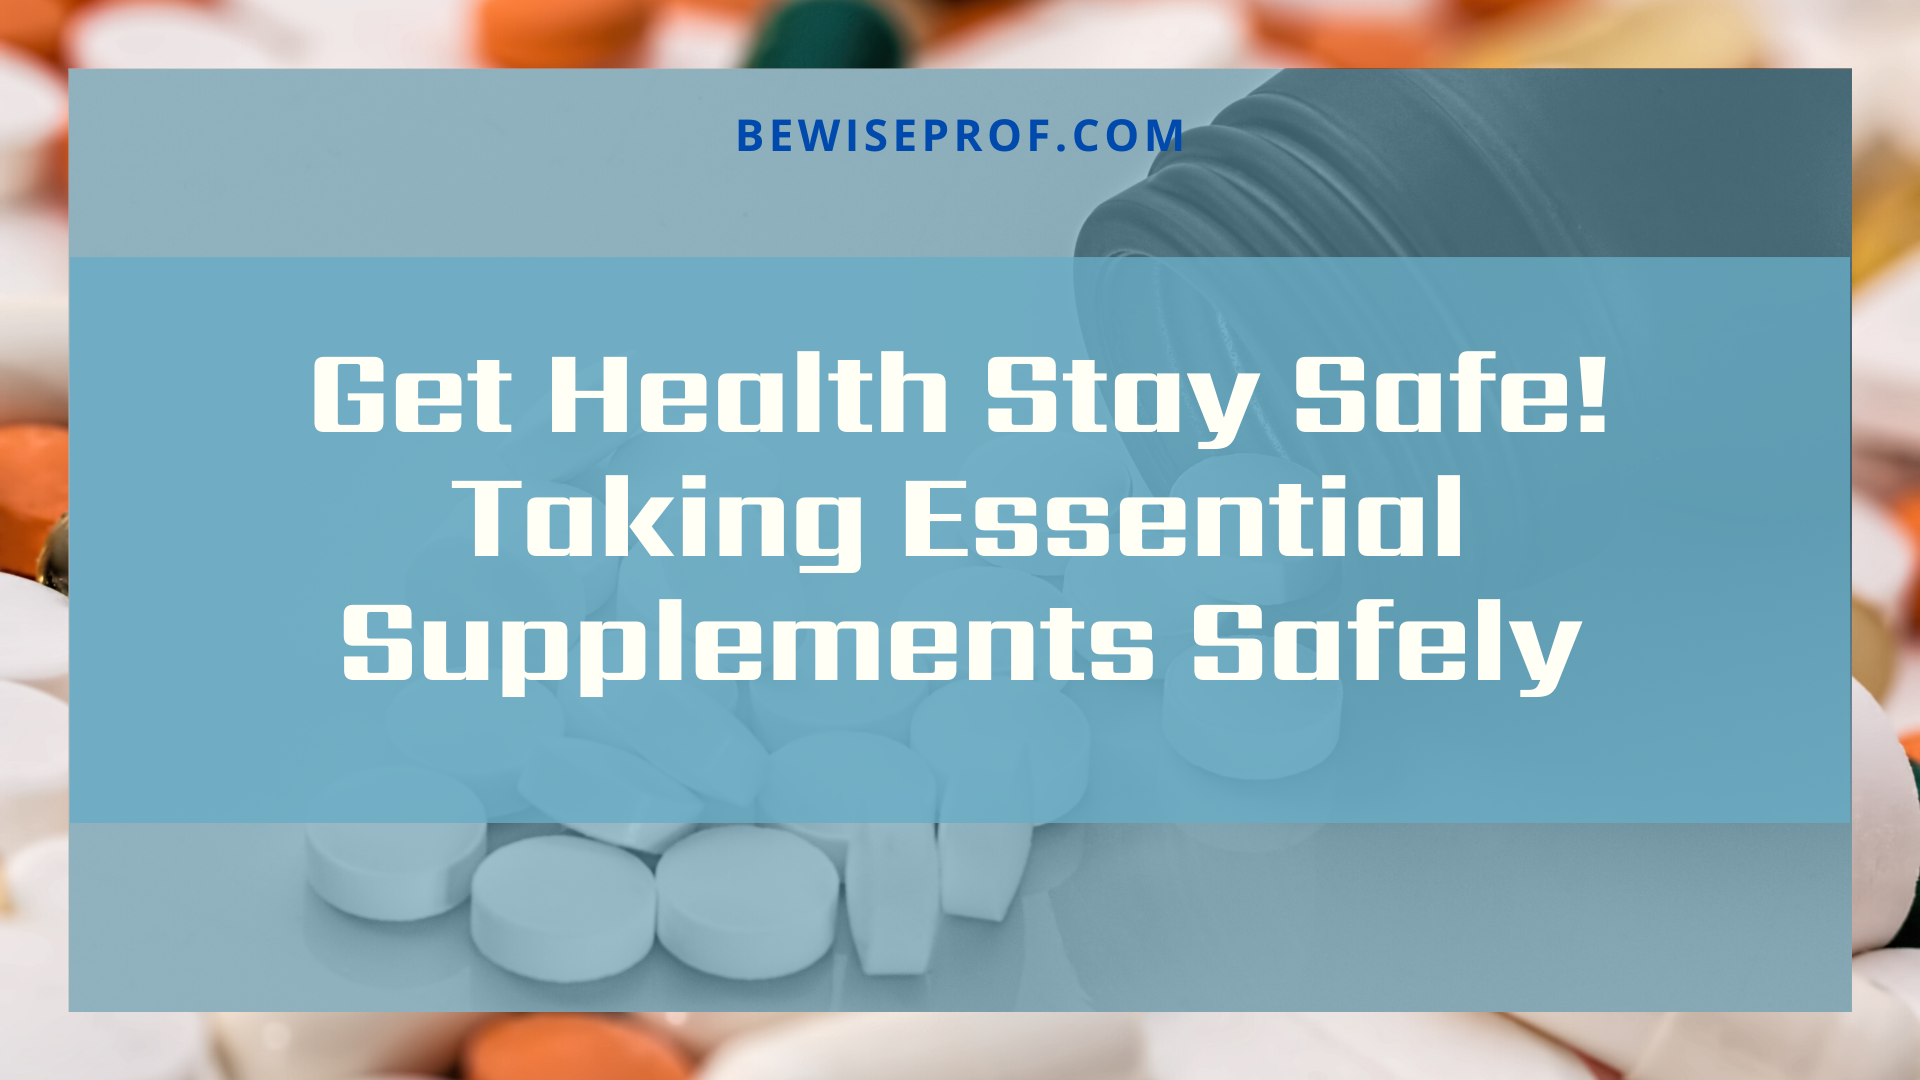 Get Health Stay Safe! Taking Essential Supplements Safely